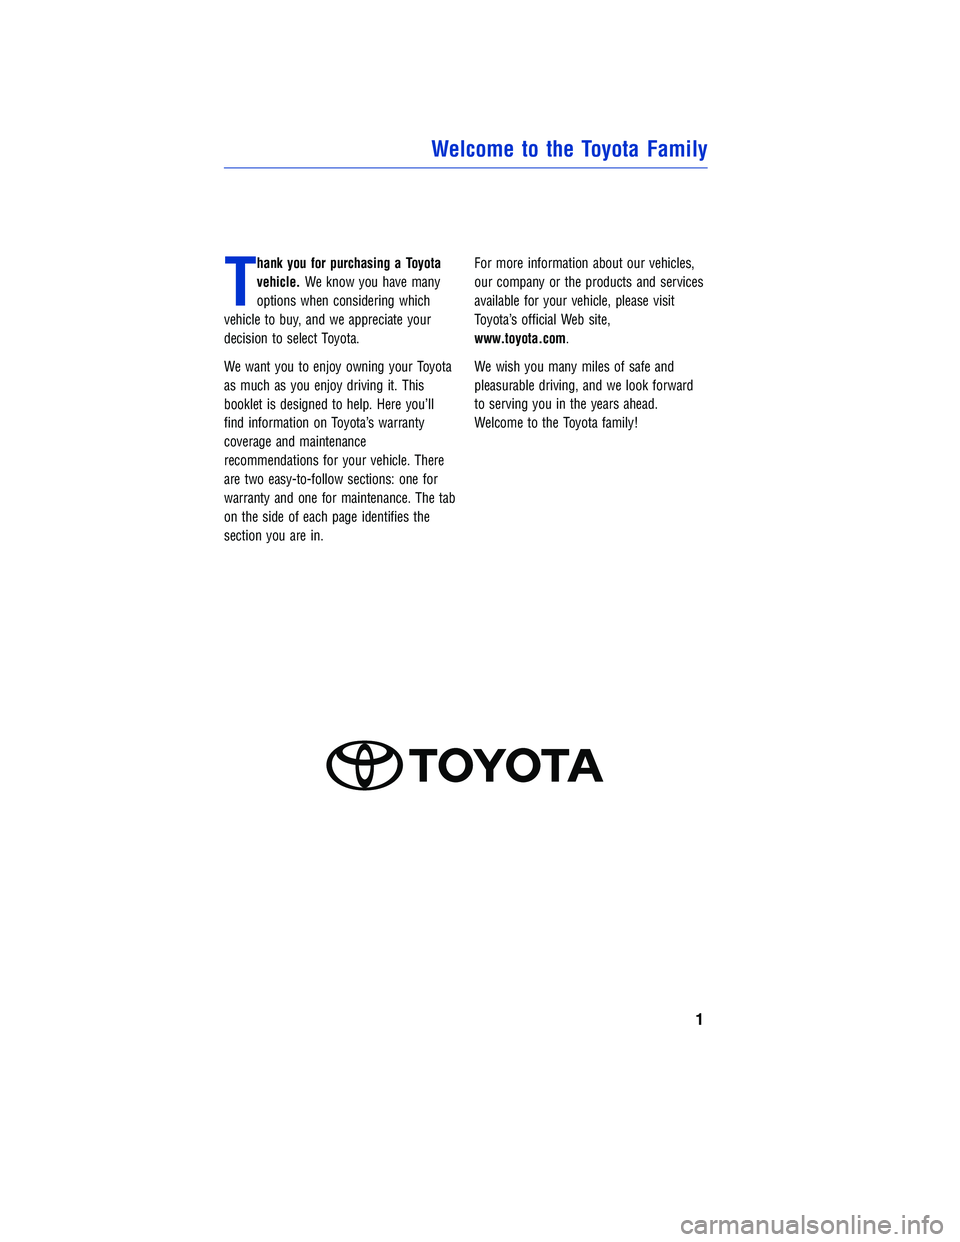 TOYOTA TUNDRA 2018  Warranties & Maintenance Guides (in English) JOBNAME: 2878010-en-2018_Tund PAGE: 1 SESS: 4 OUTPUT: Tue Jun 27 13:55:34 2017
/InfoShareAuthorCODA/InfoShareAuthorCODA/TS_Warr_Maint/2878010-en-2018_T\
undra.00505-18WMG-TUN/TS_Warr_Maint_v1
T
hank y